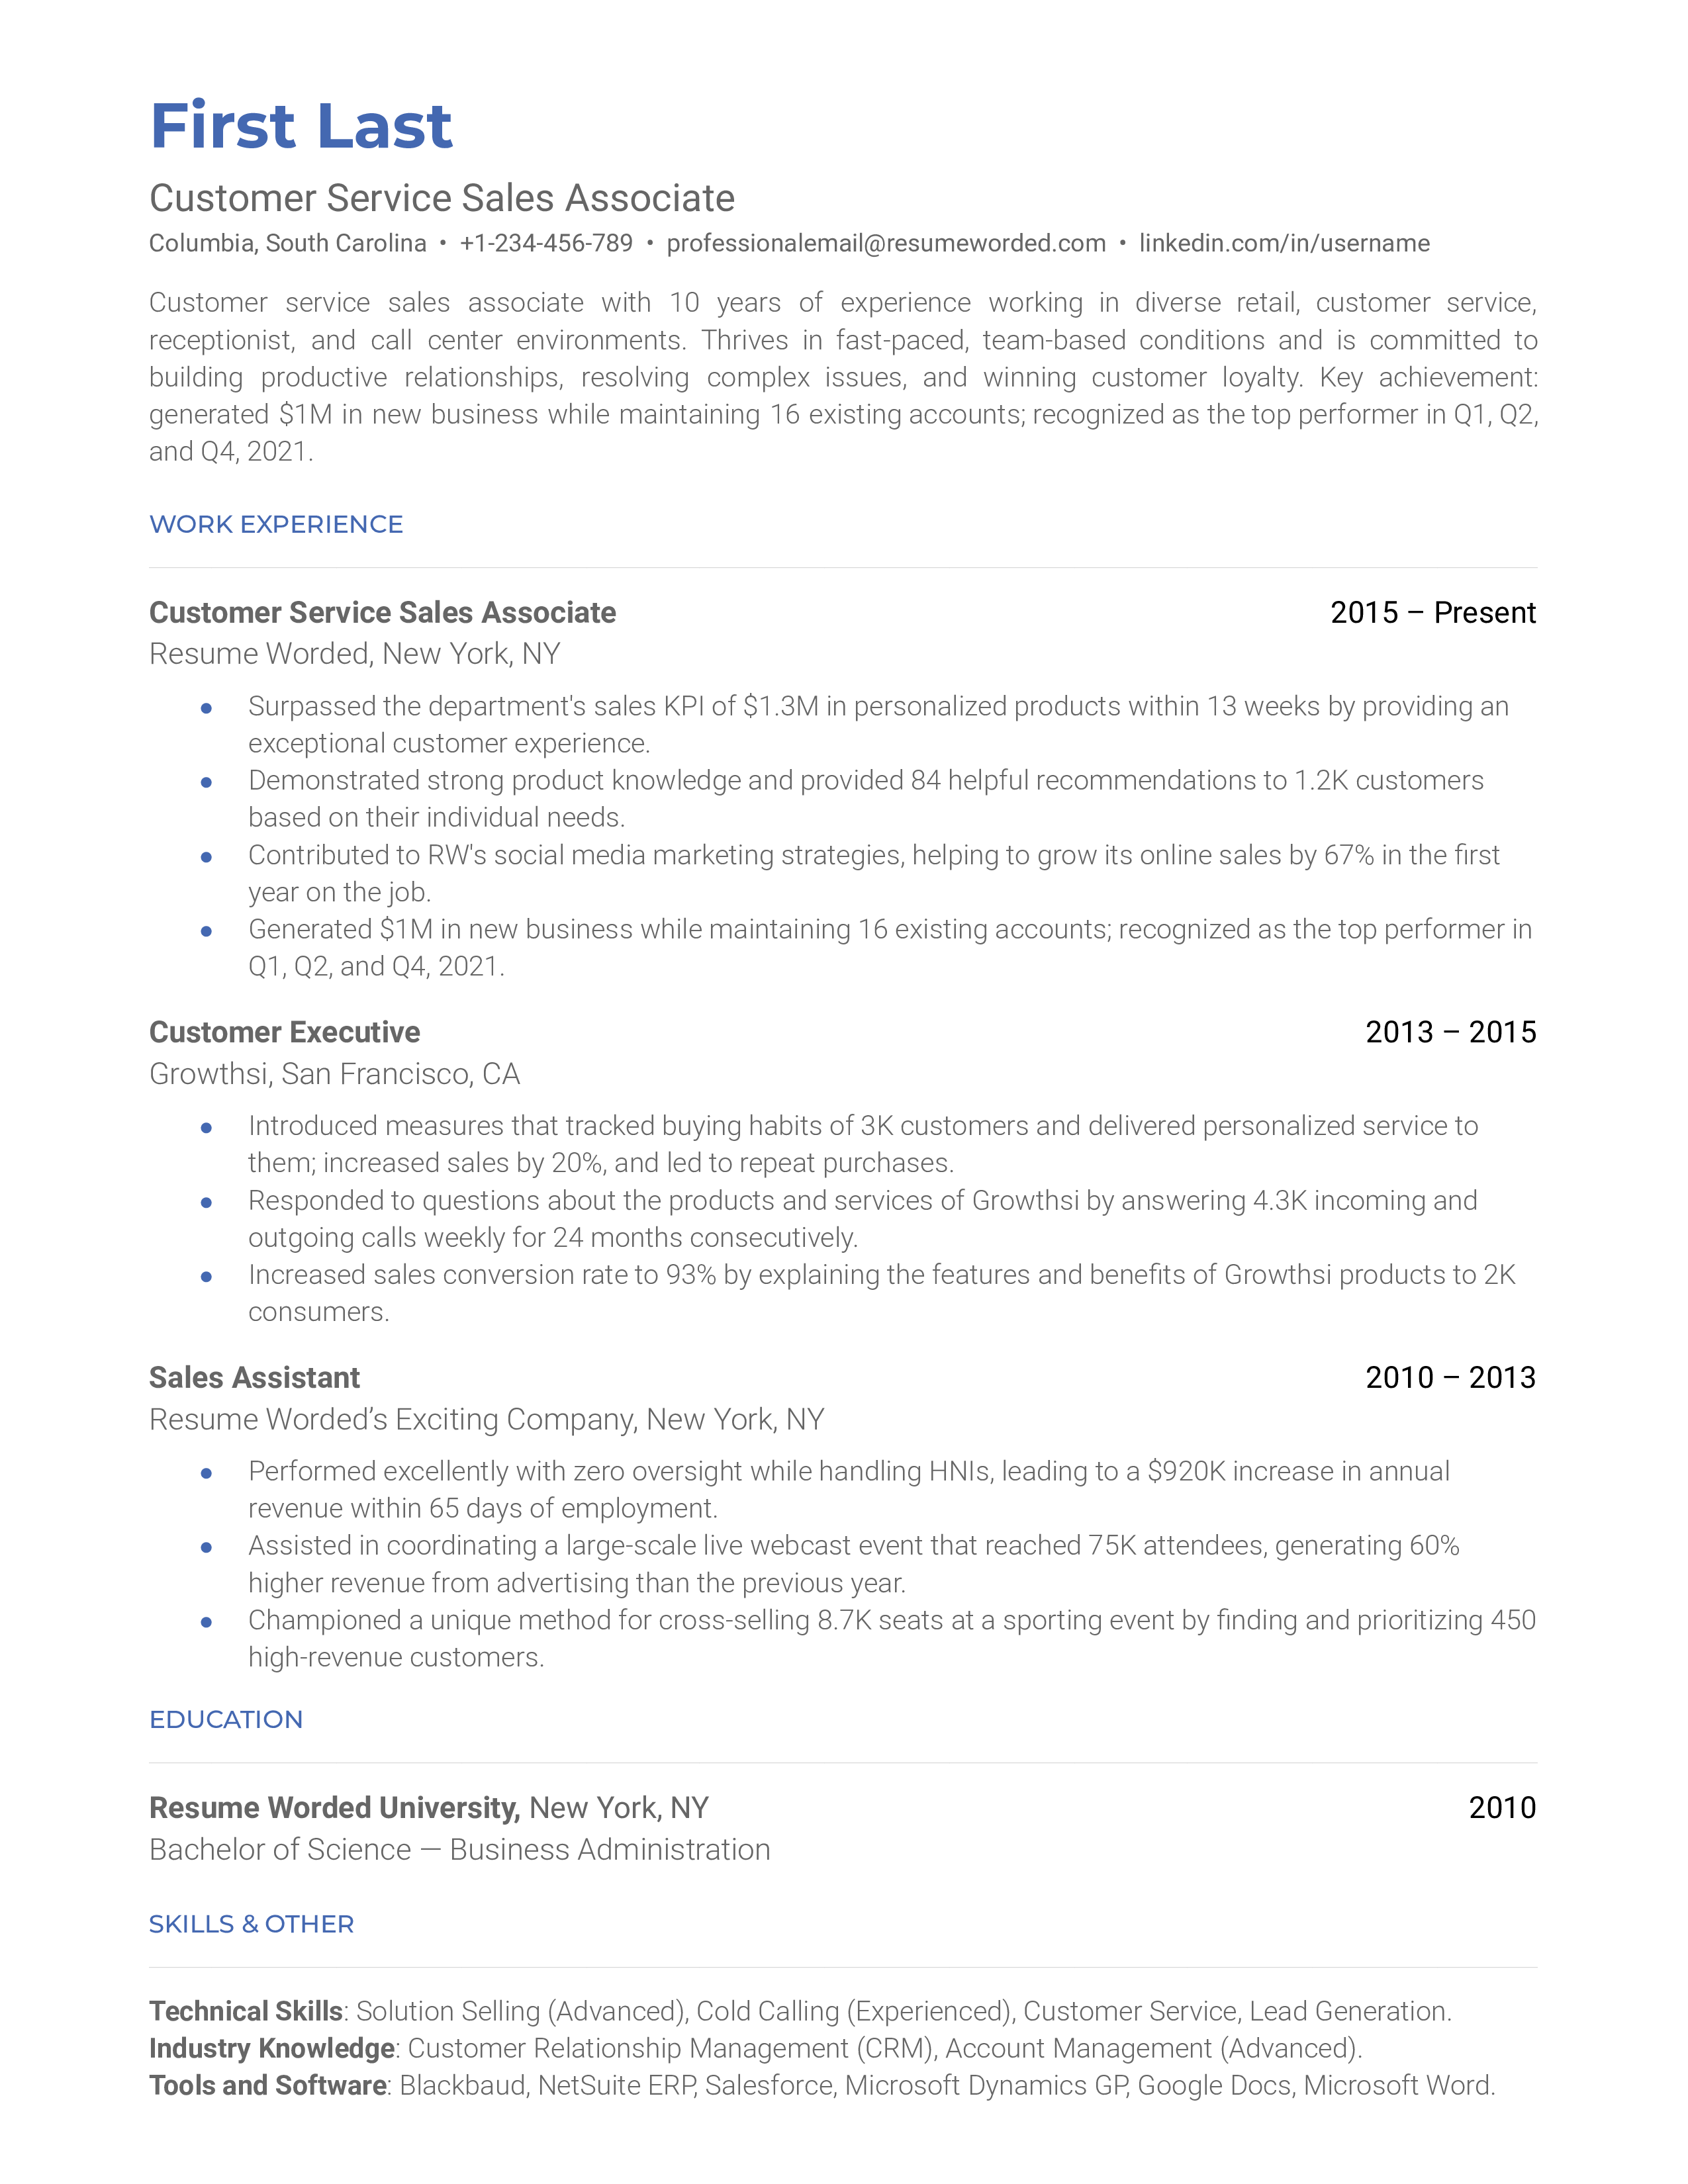 Customer service sales associate resume sample that highlights the applicant’s sales experience.